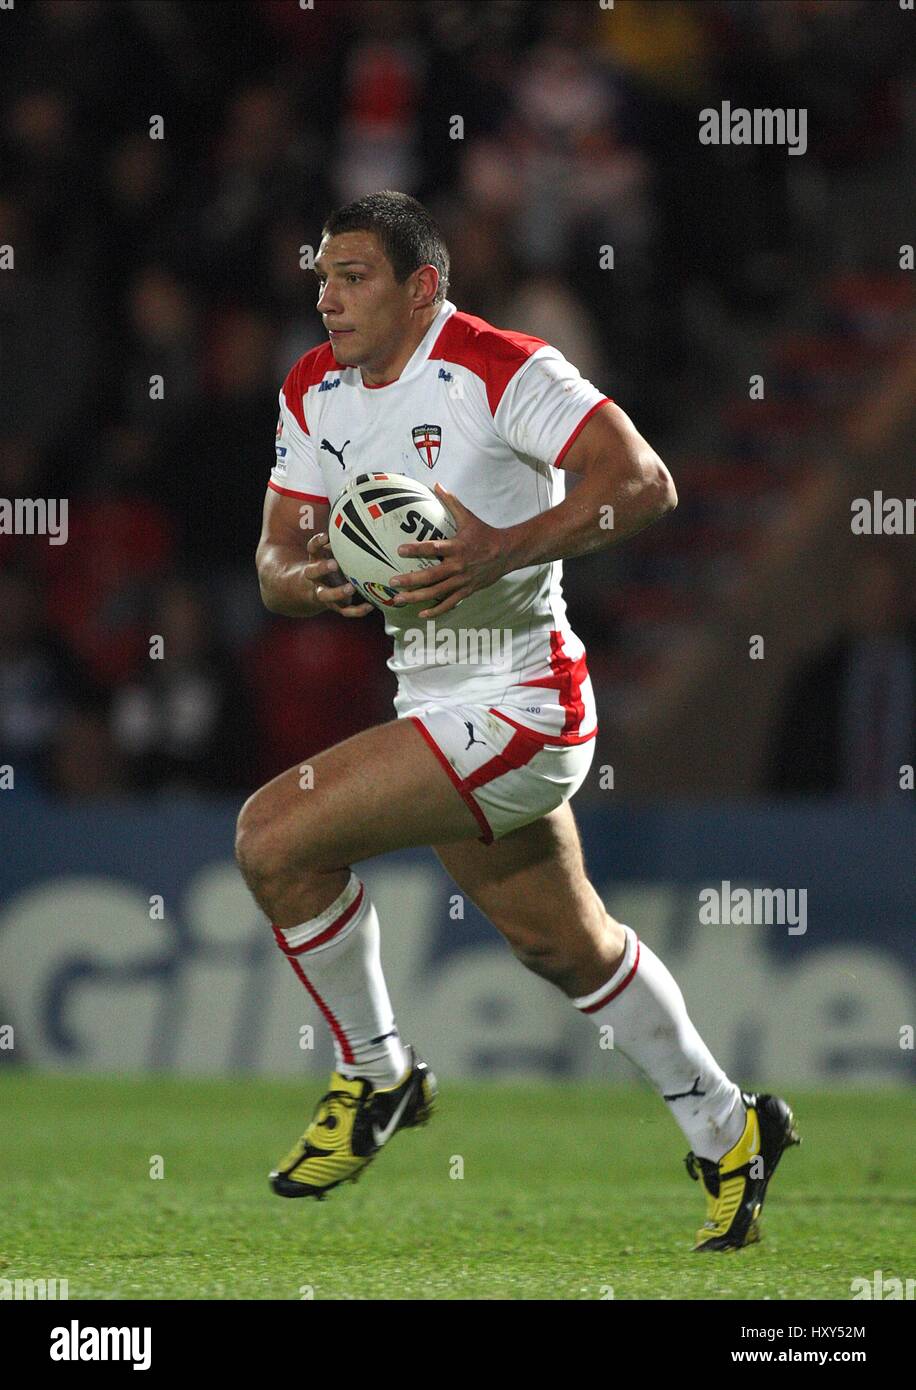 RYAN HALL ENGLAND RUGBY LEAGUE KEEPMOAT Stadion DONCASTER ENGLAND 23. Oktober 2009 Stockfoto